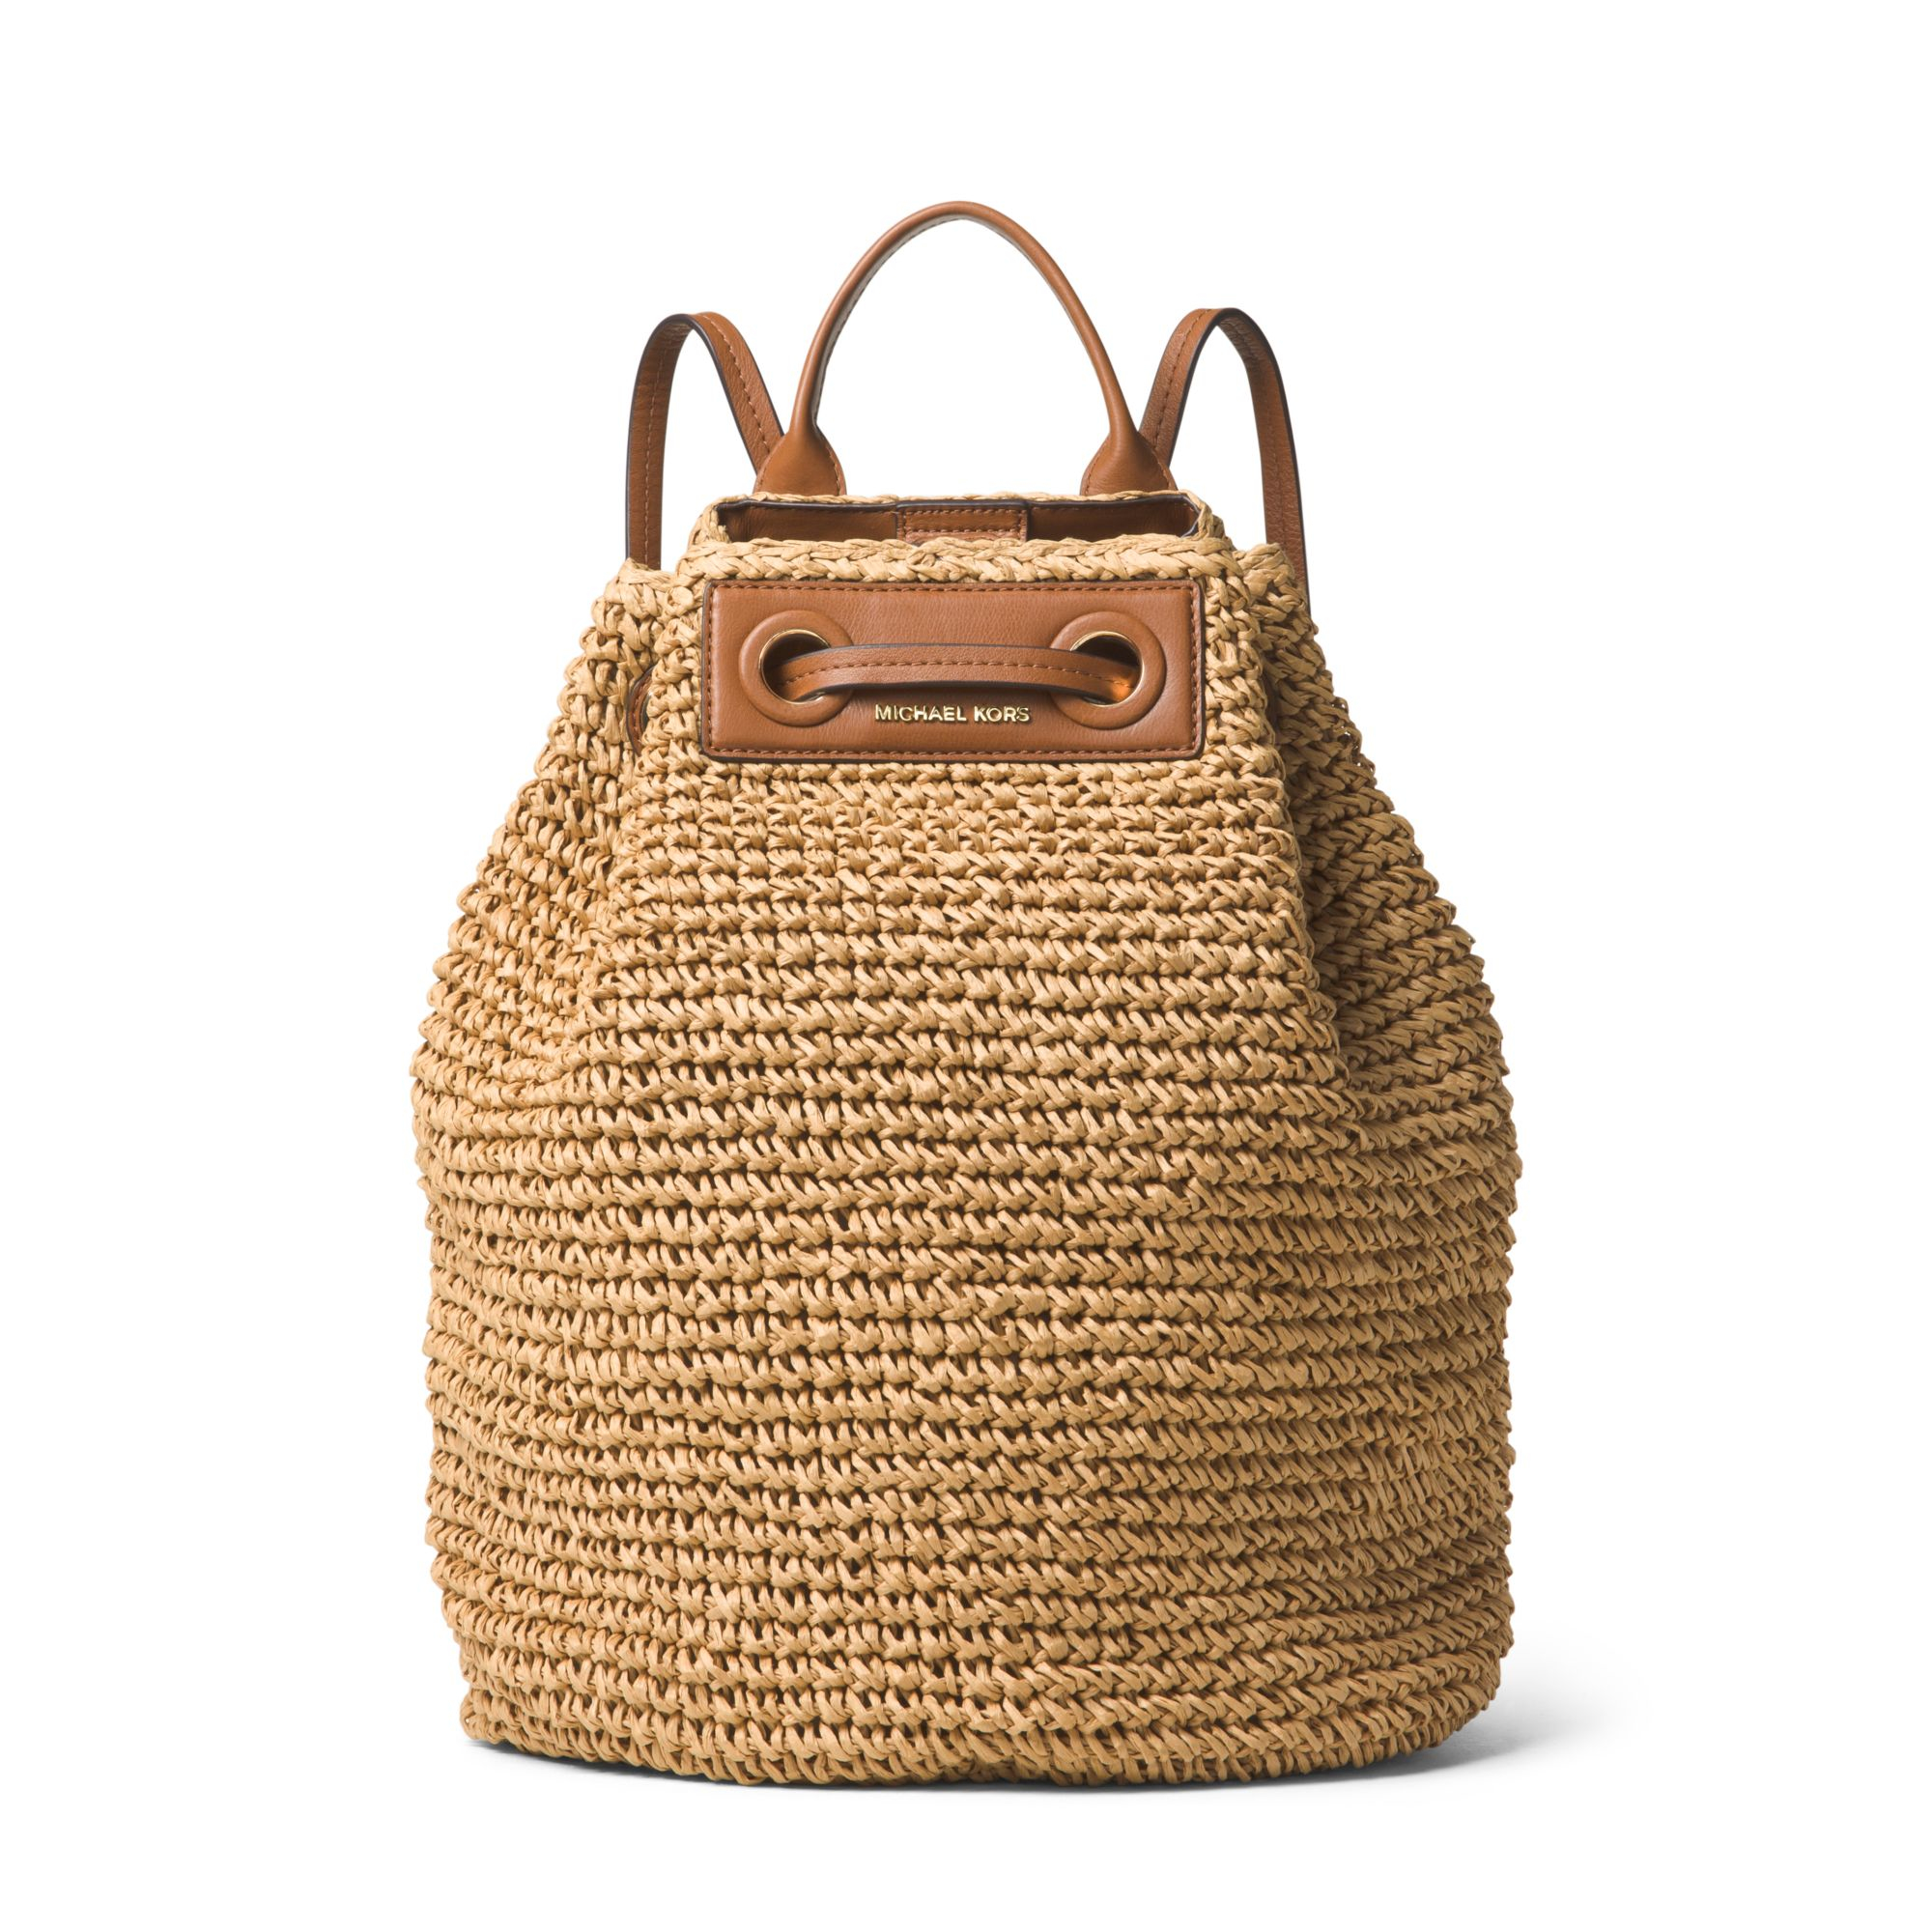 Michael Kors Krissy Large Straw Backpack in Natural | Lyst